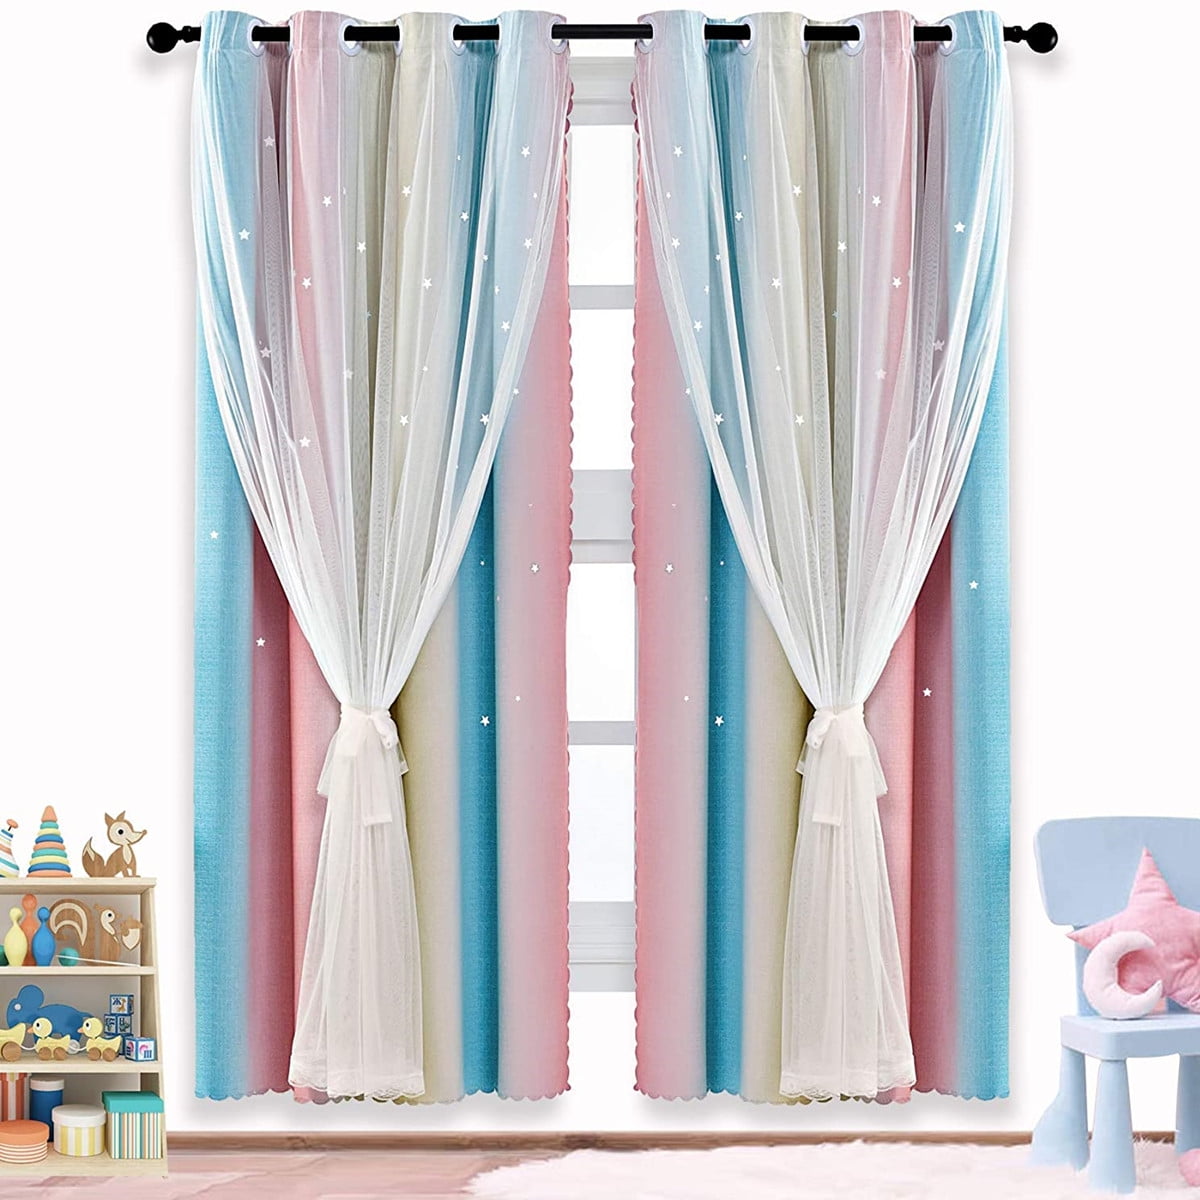 GIRLS PINK LILAC BEDROOM 66 x 54 Inch NEW PEPPA PIG 'HAPPY' PAIR OF CURTAINS 